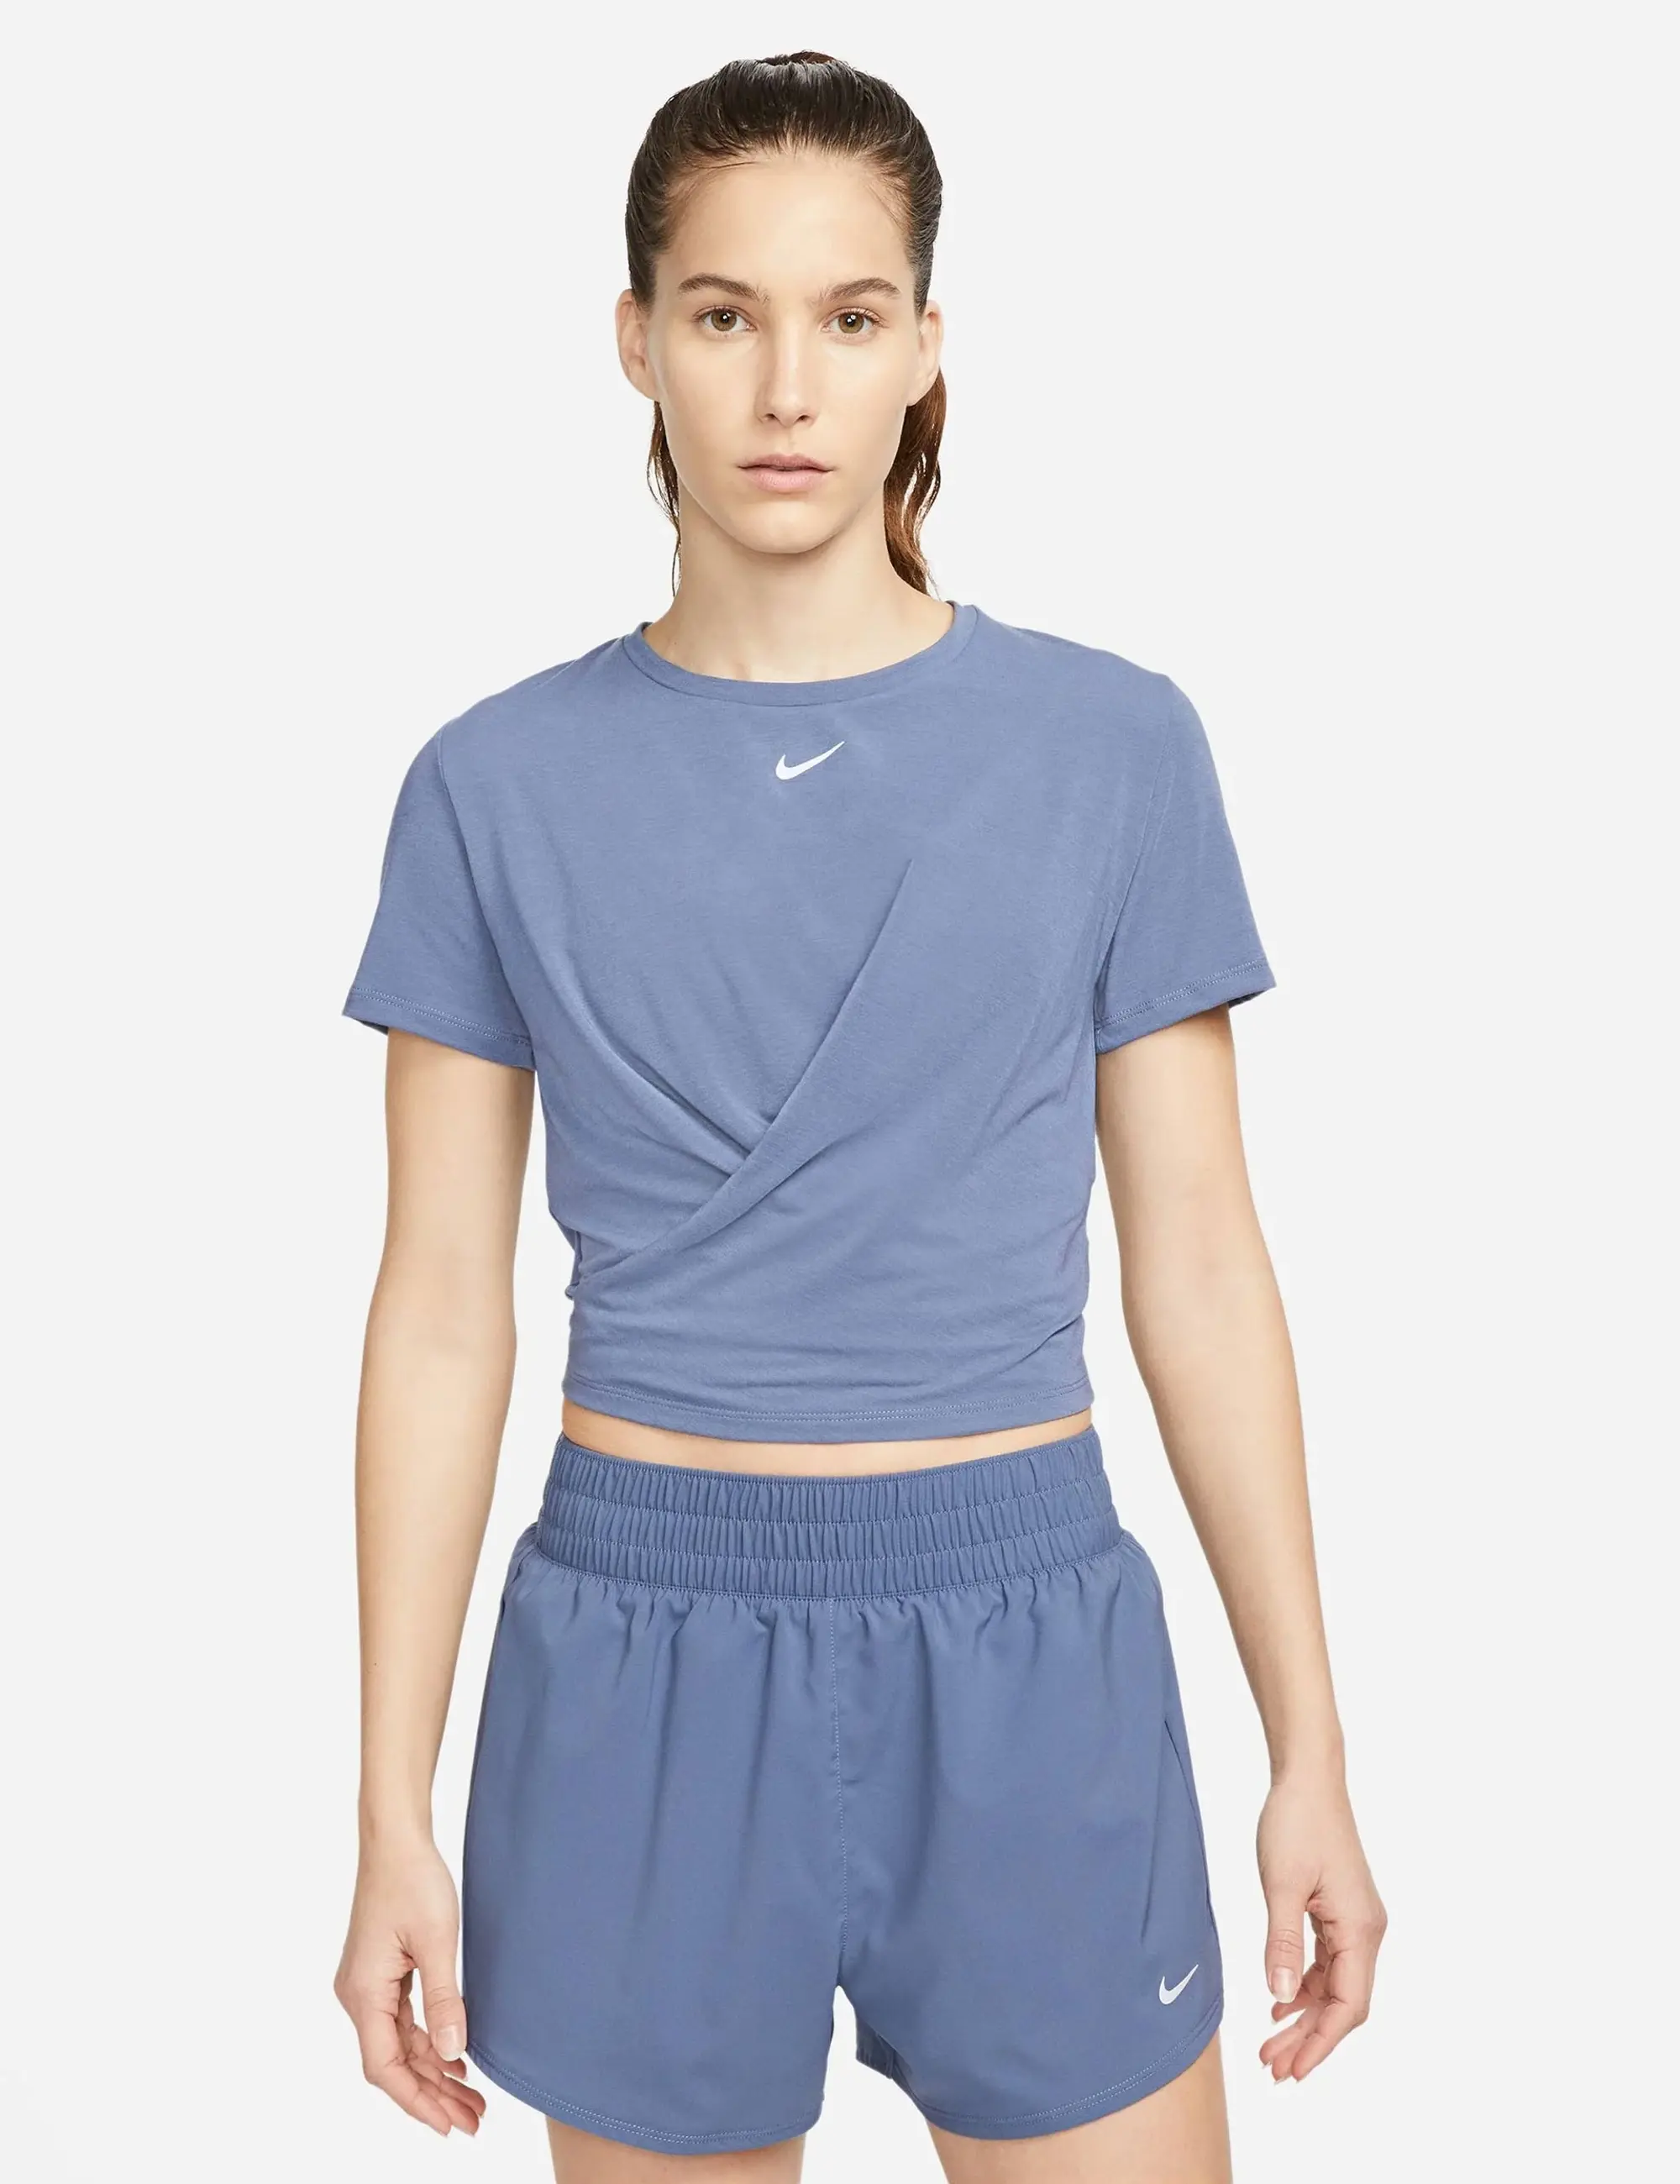 NIKE Dri-FIT One Luxe Short-Sleeve Top - Diffused Blue - XL